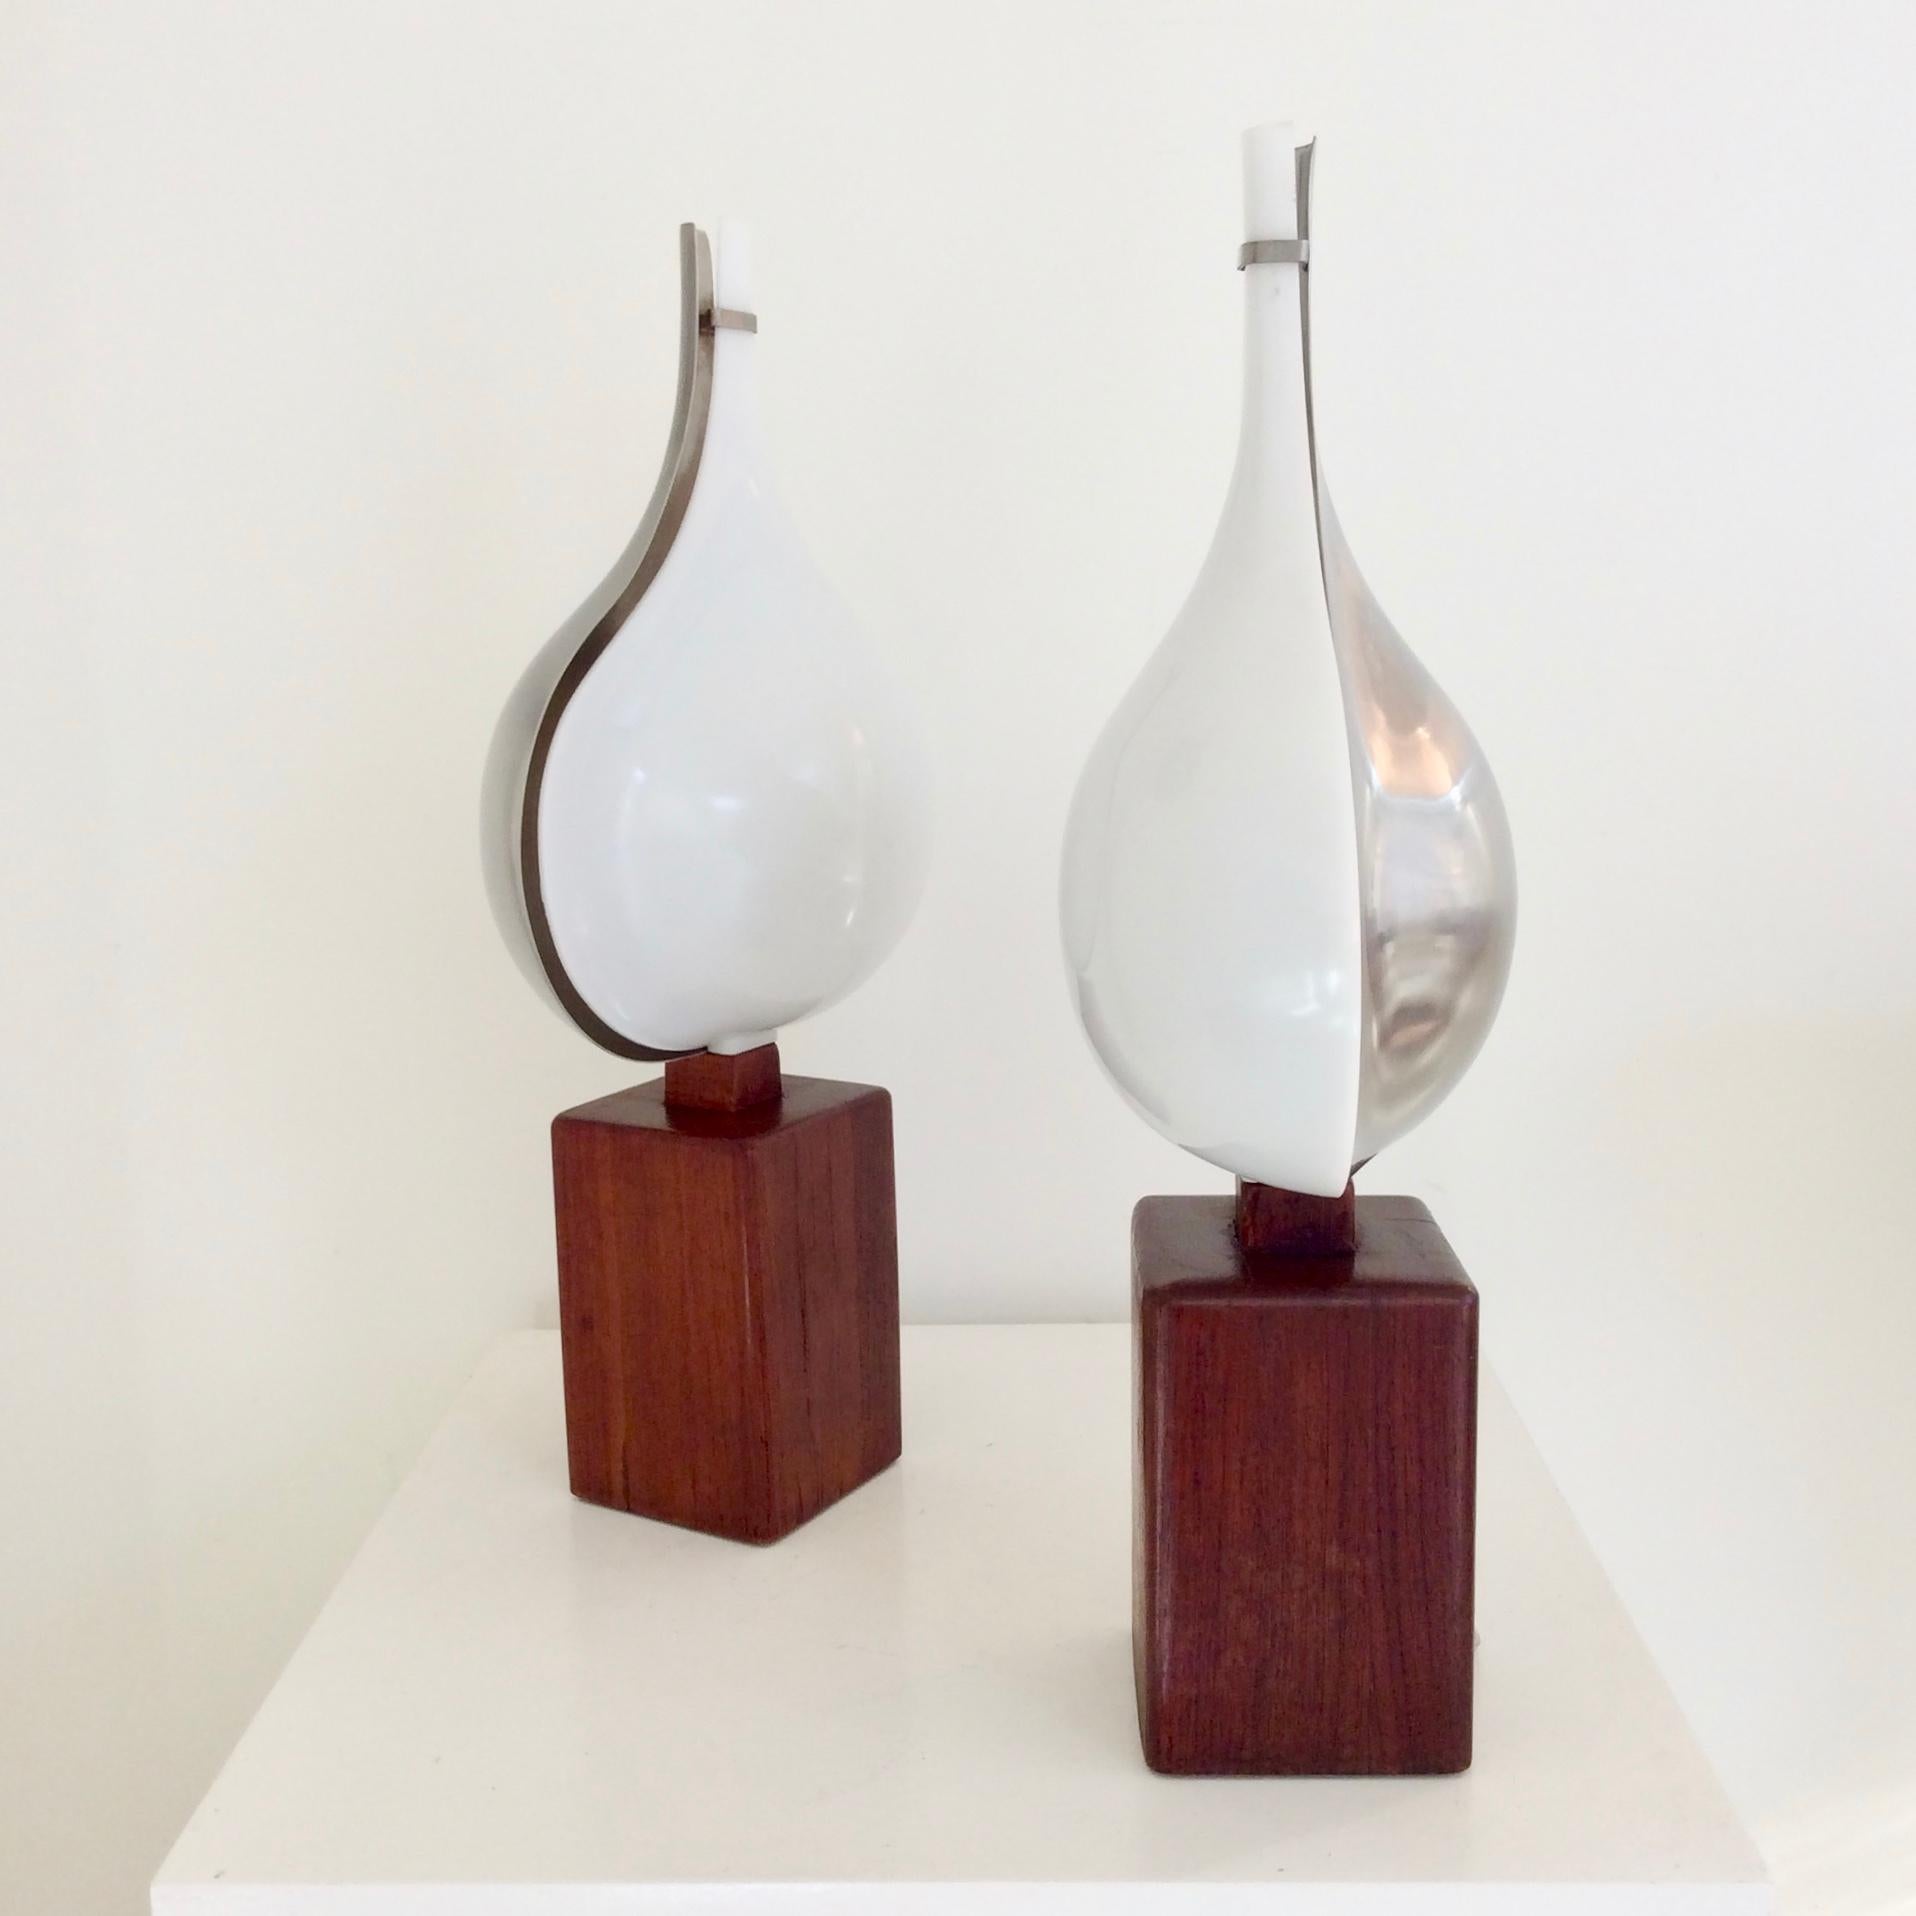 Rare pair of Rémy Letang table lamps, circa 1970, France.
Stainless steel and Perspex reflector, base in solid teak.
One E14 bulb of 40 w.
Dimensions: 47 cm H, 24 cm W, 15 cm D.
Good original condition.
All purchases are covered by our Buyer